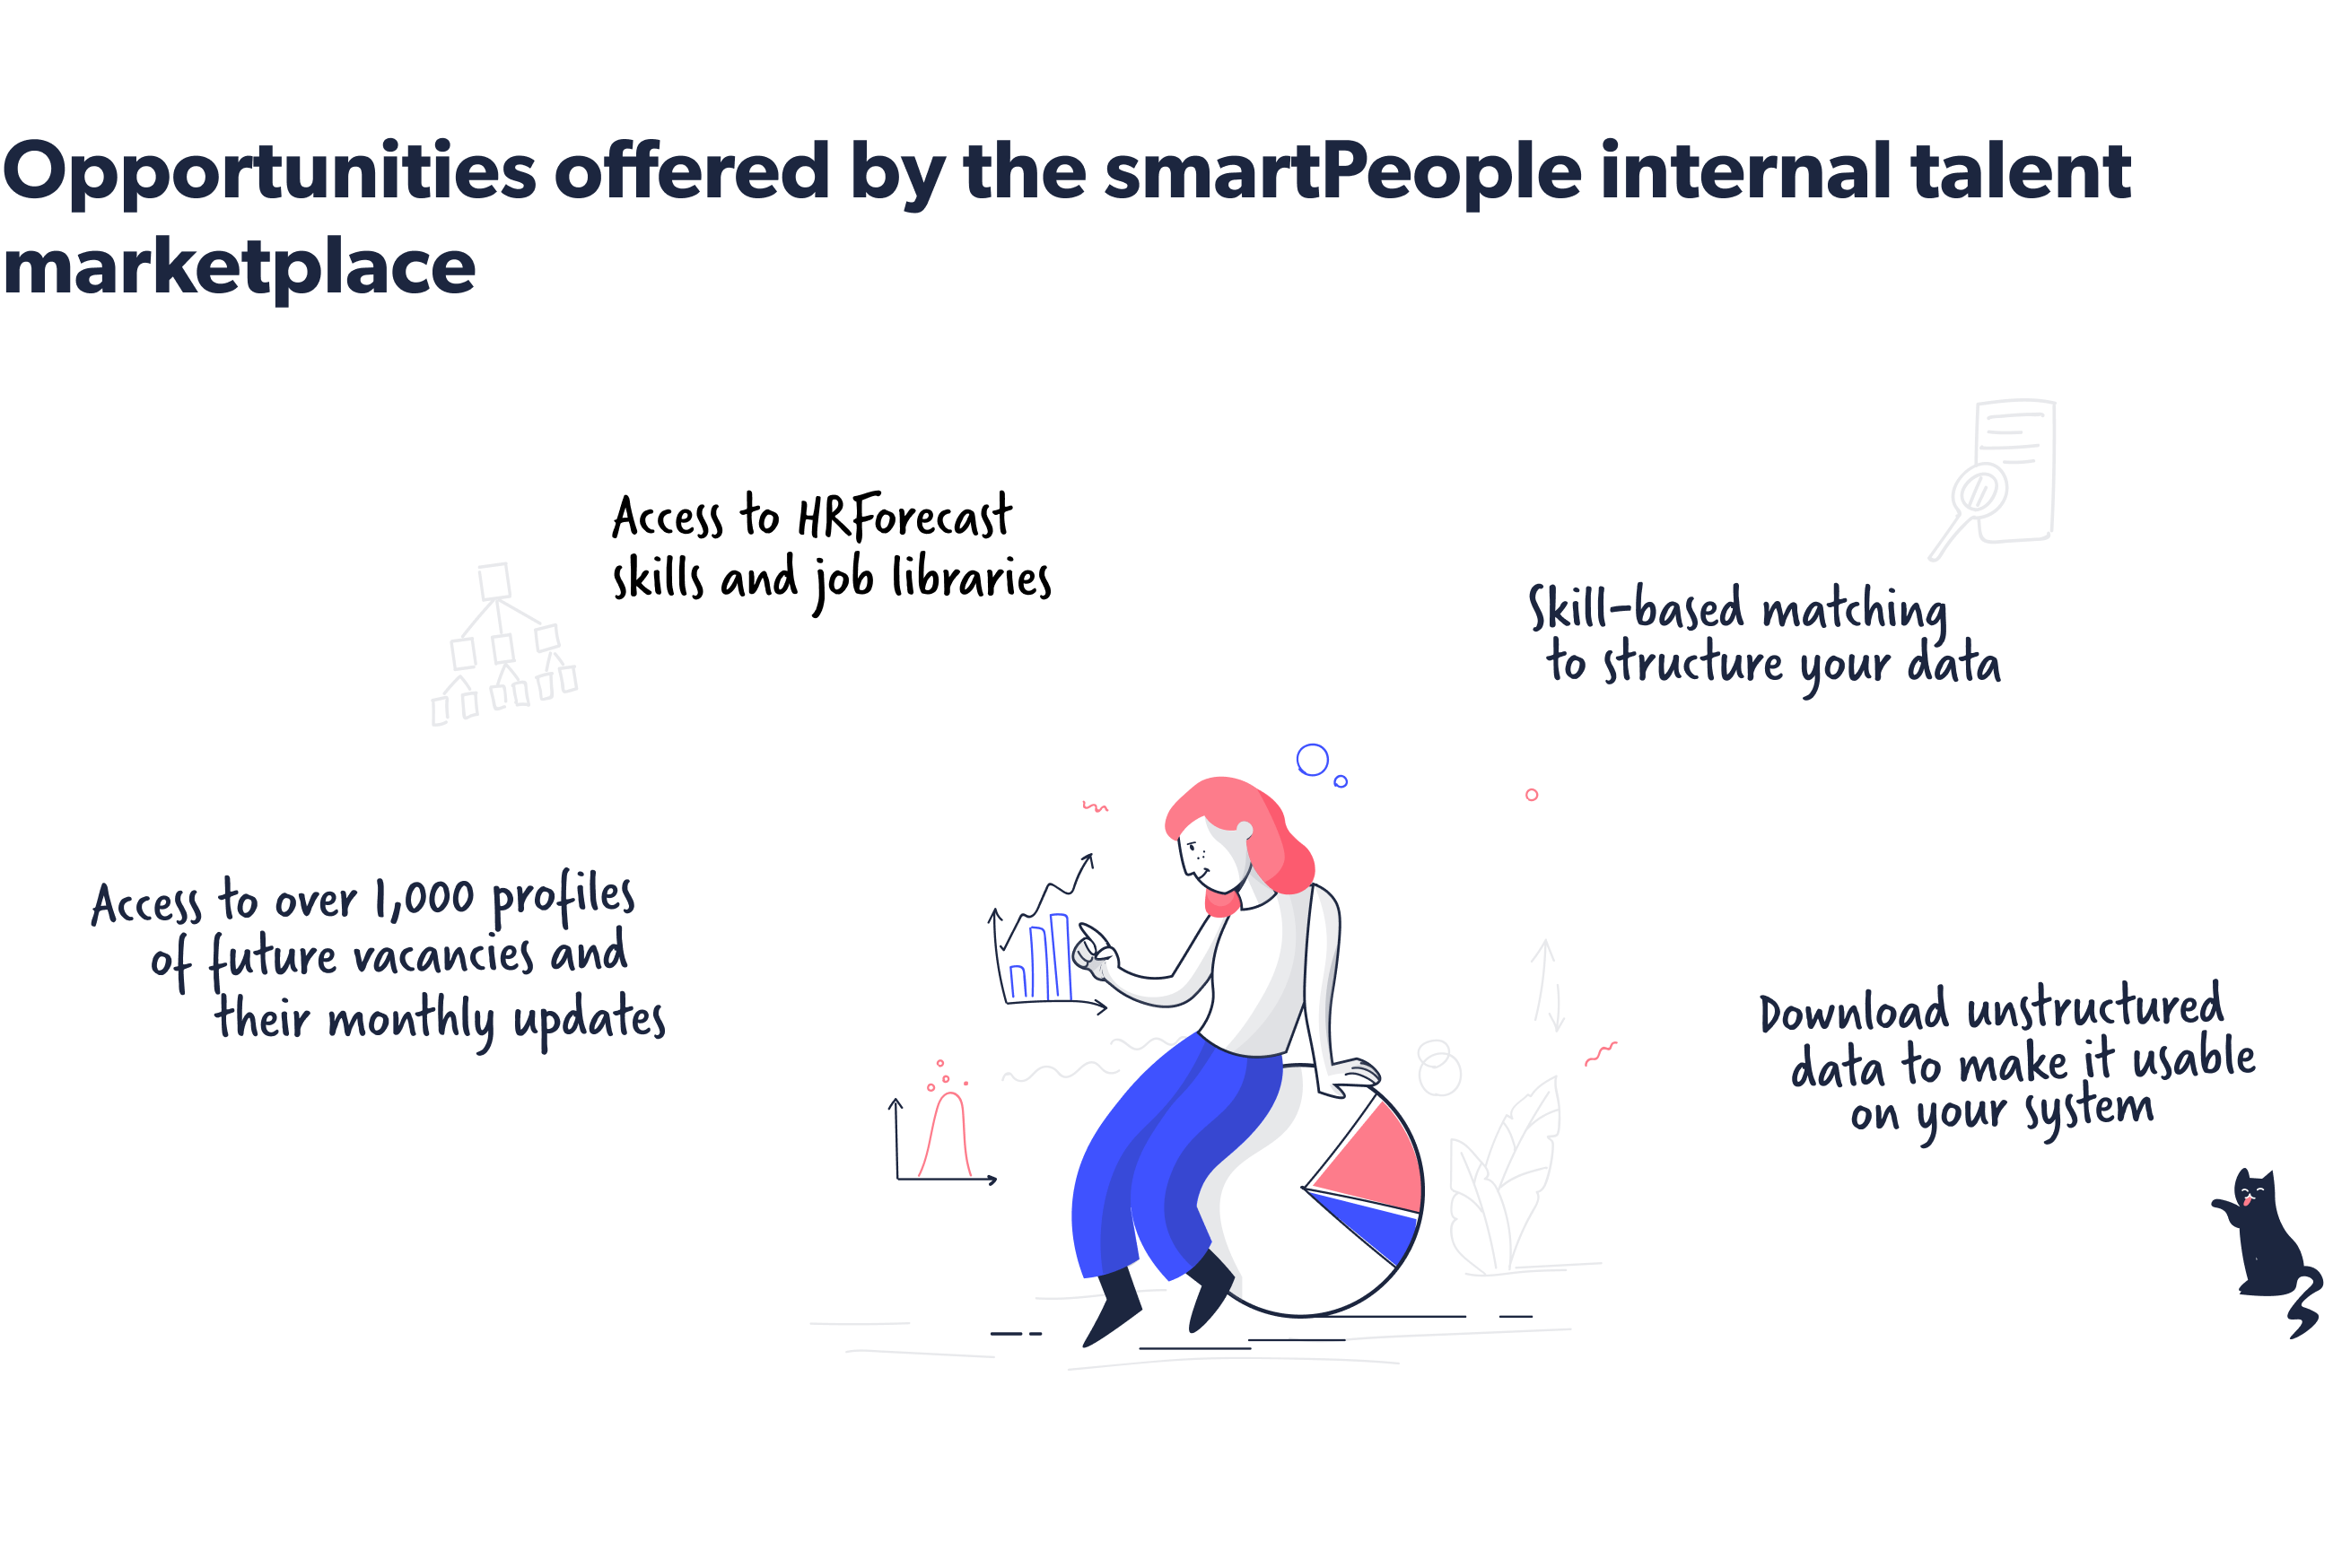 Opportunities offered by the smartPeople internal talent marketplace